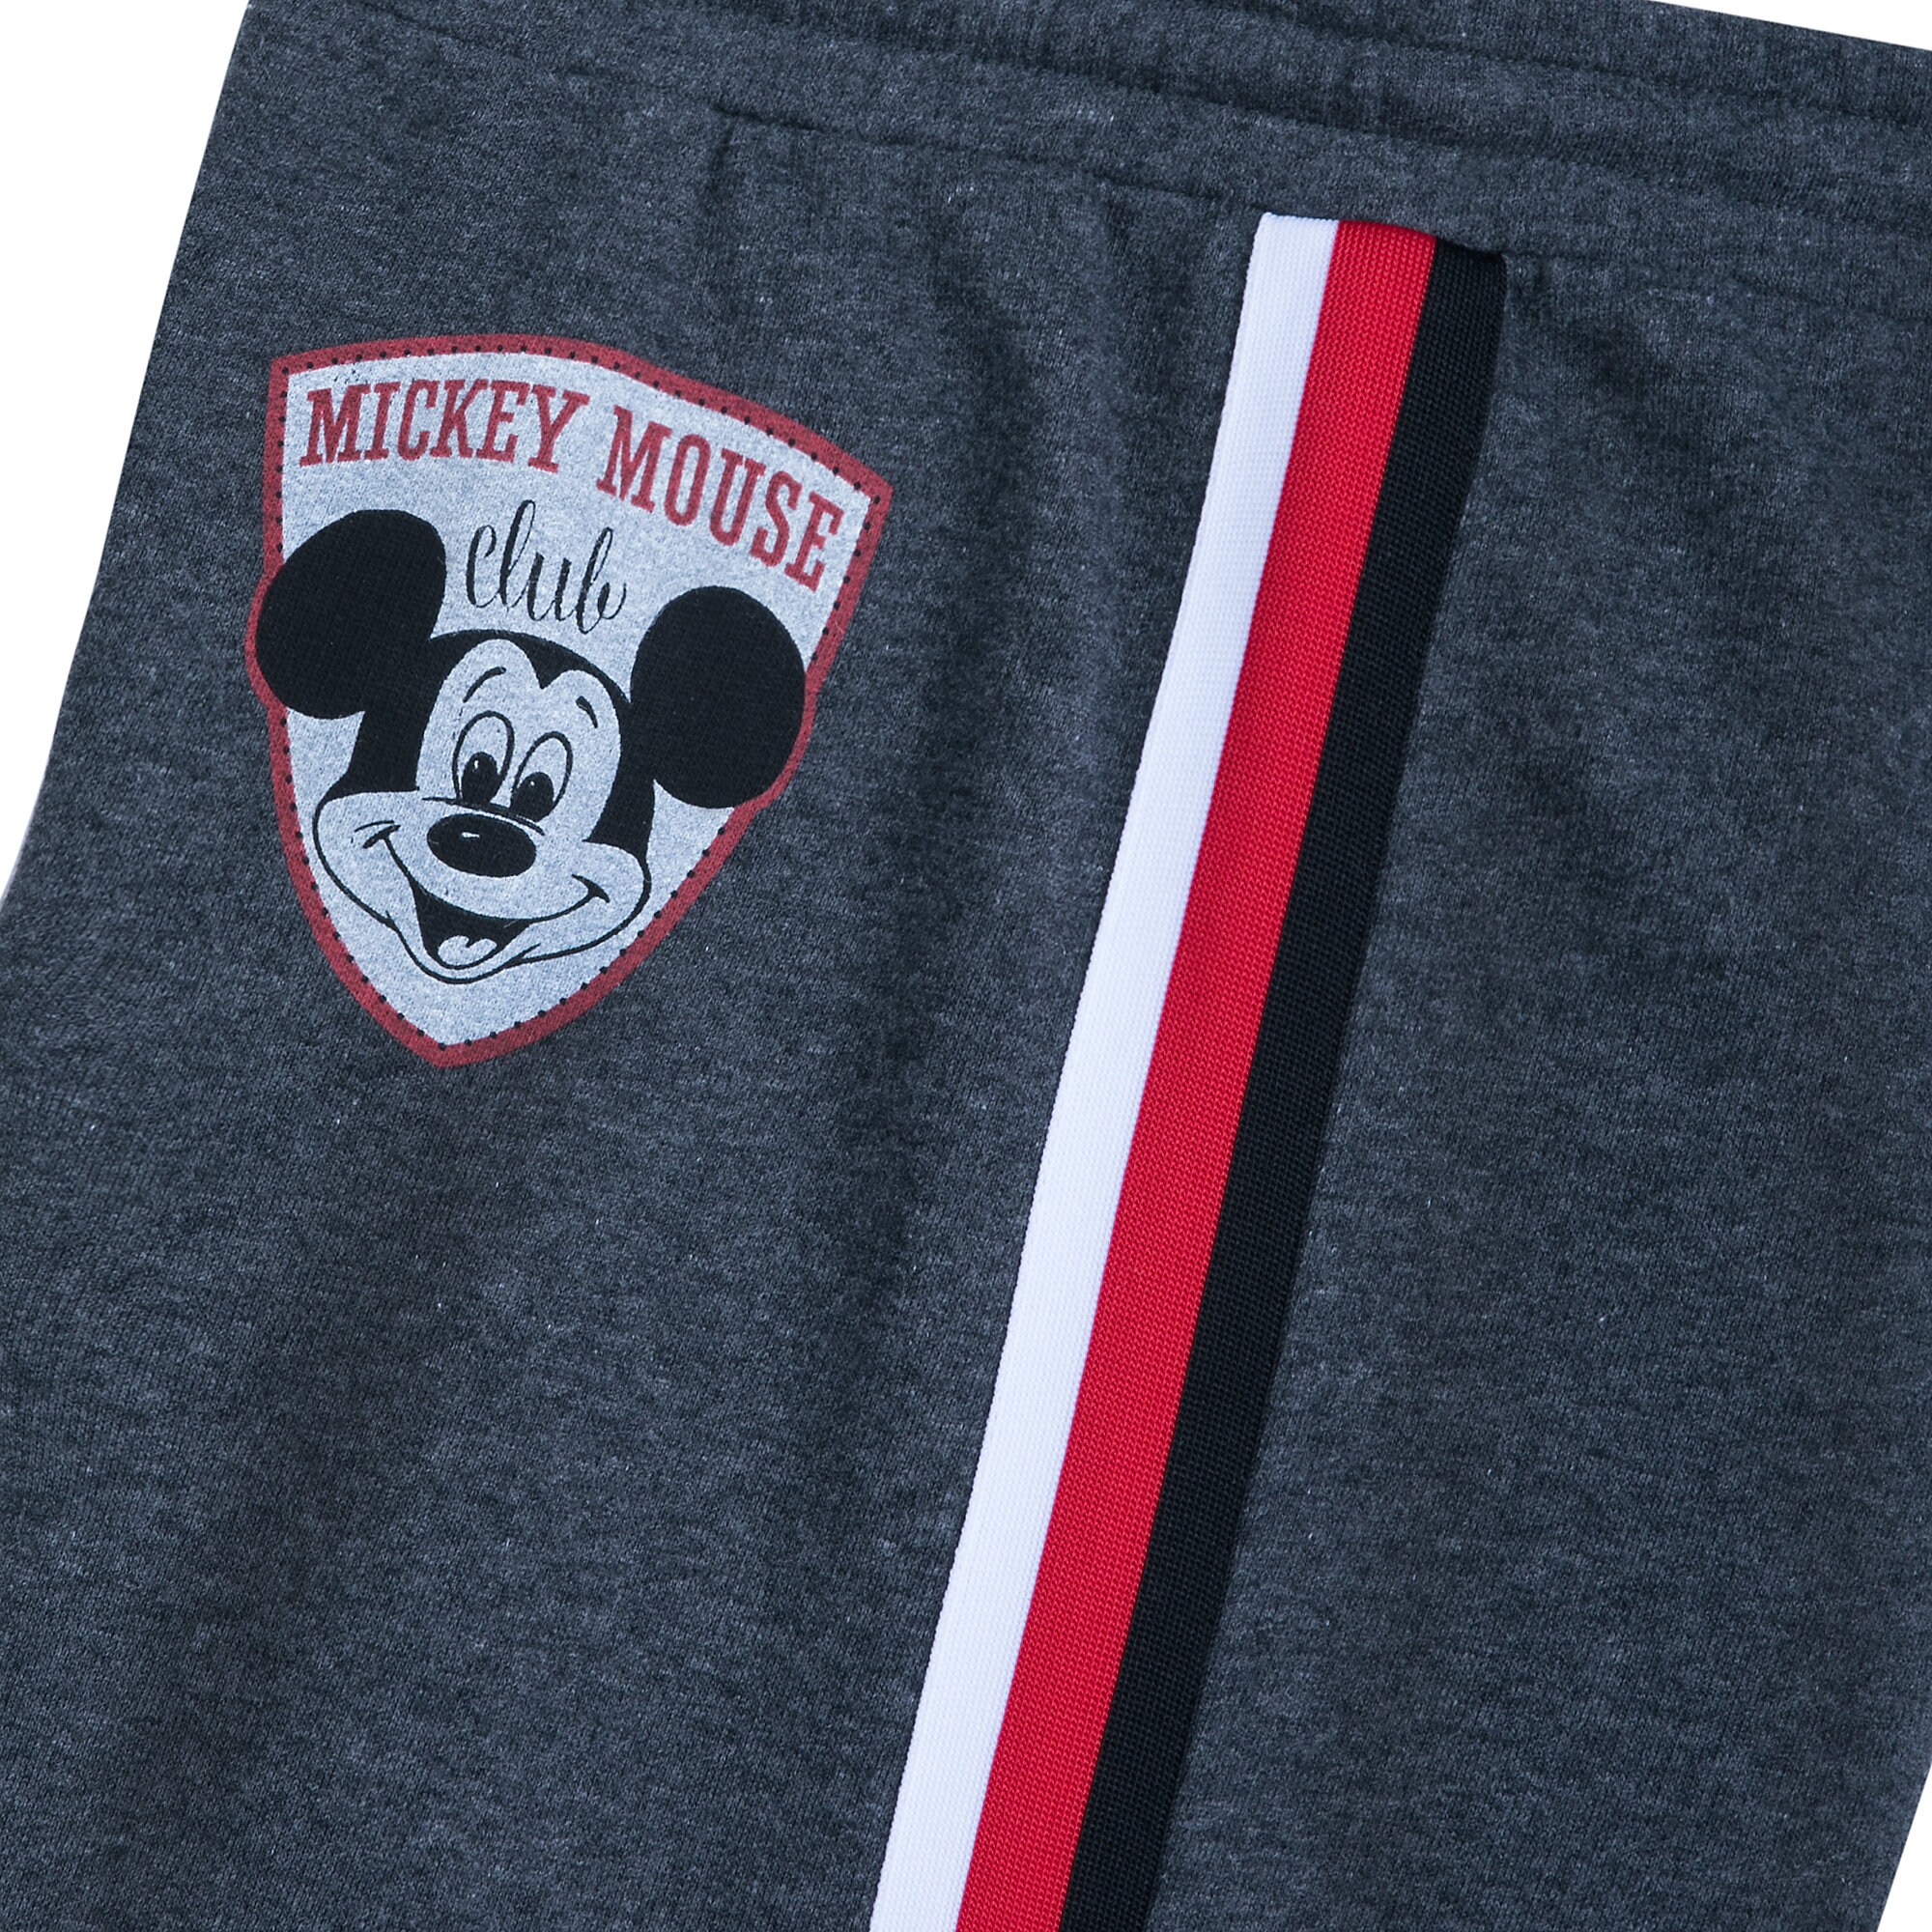 Mickey Mouse Club Jogger Pants for Men